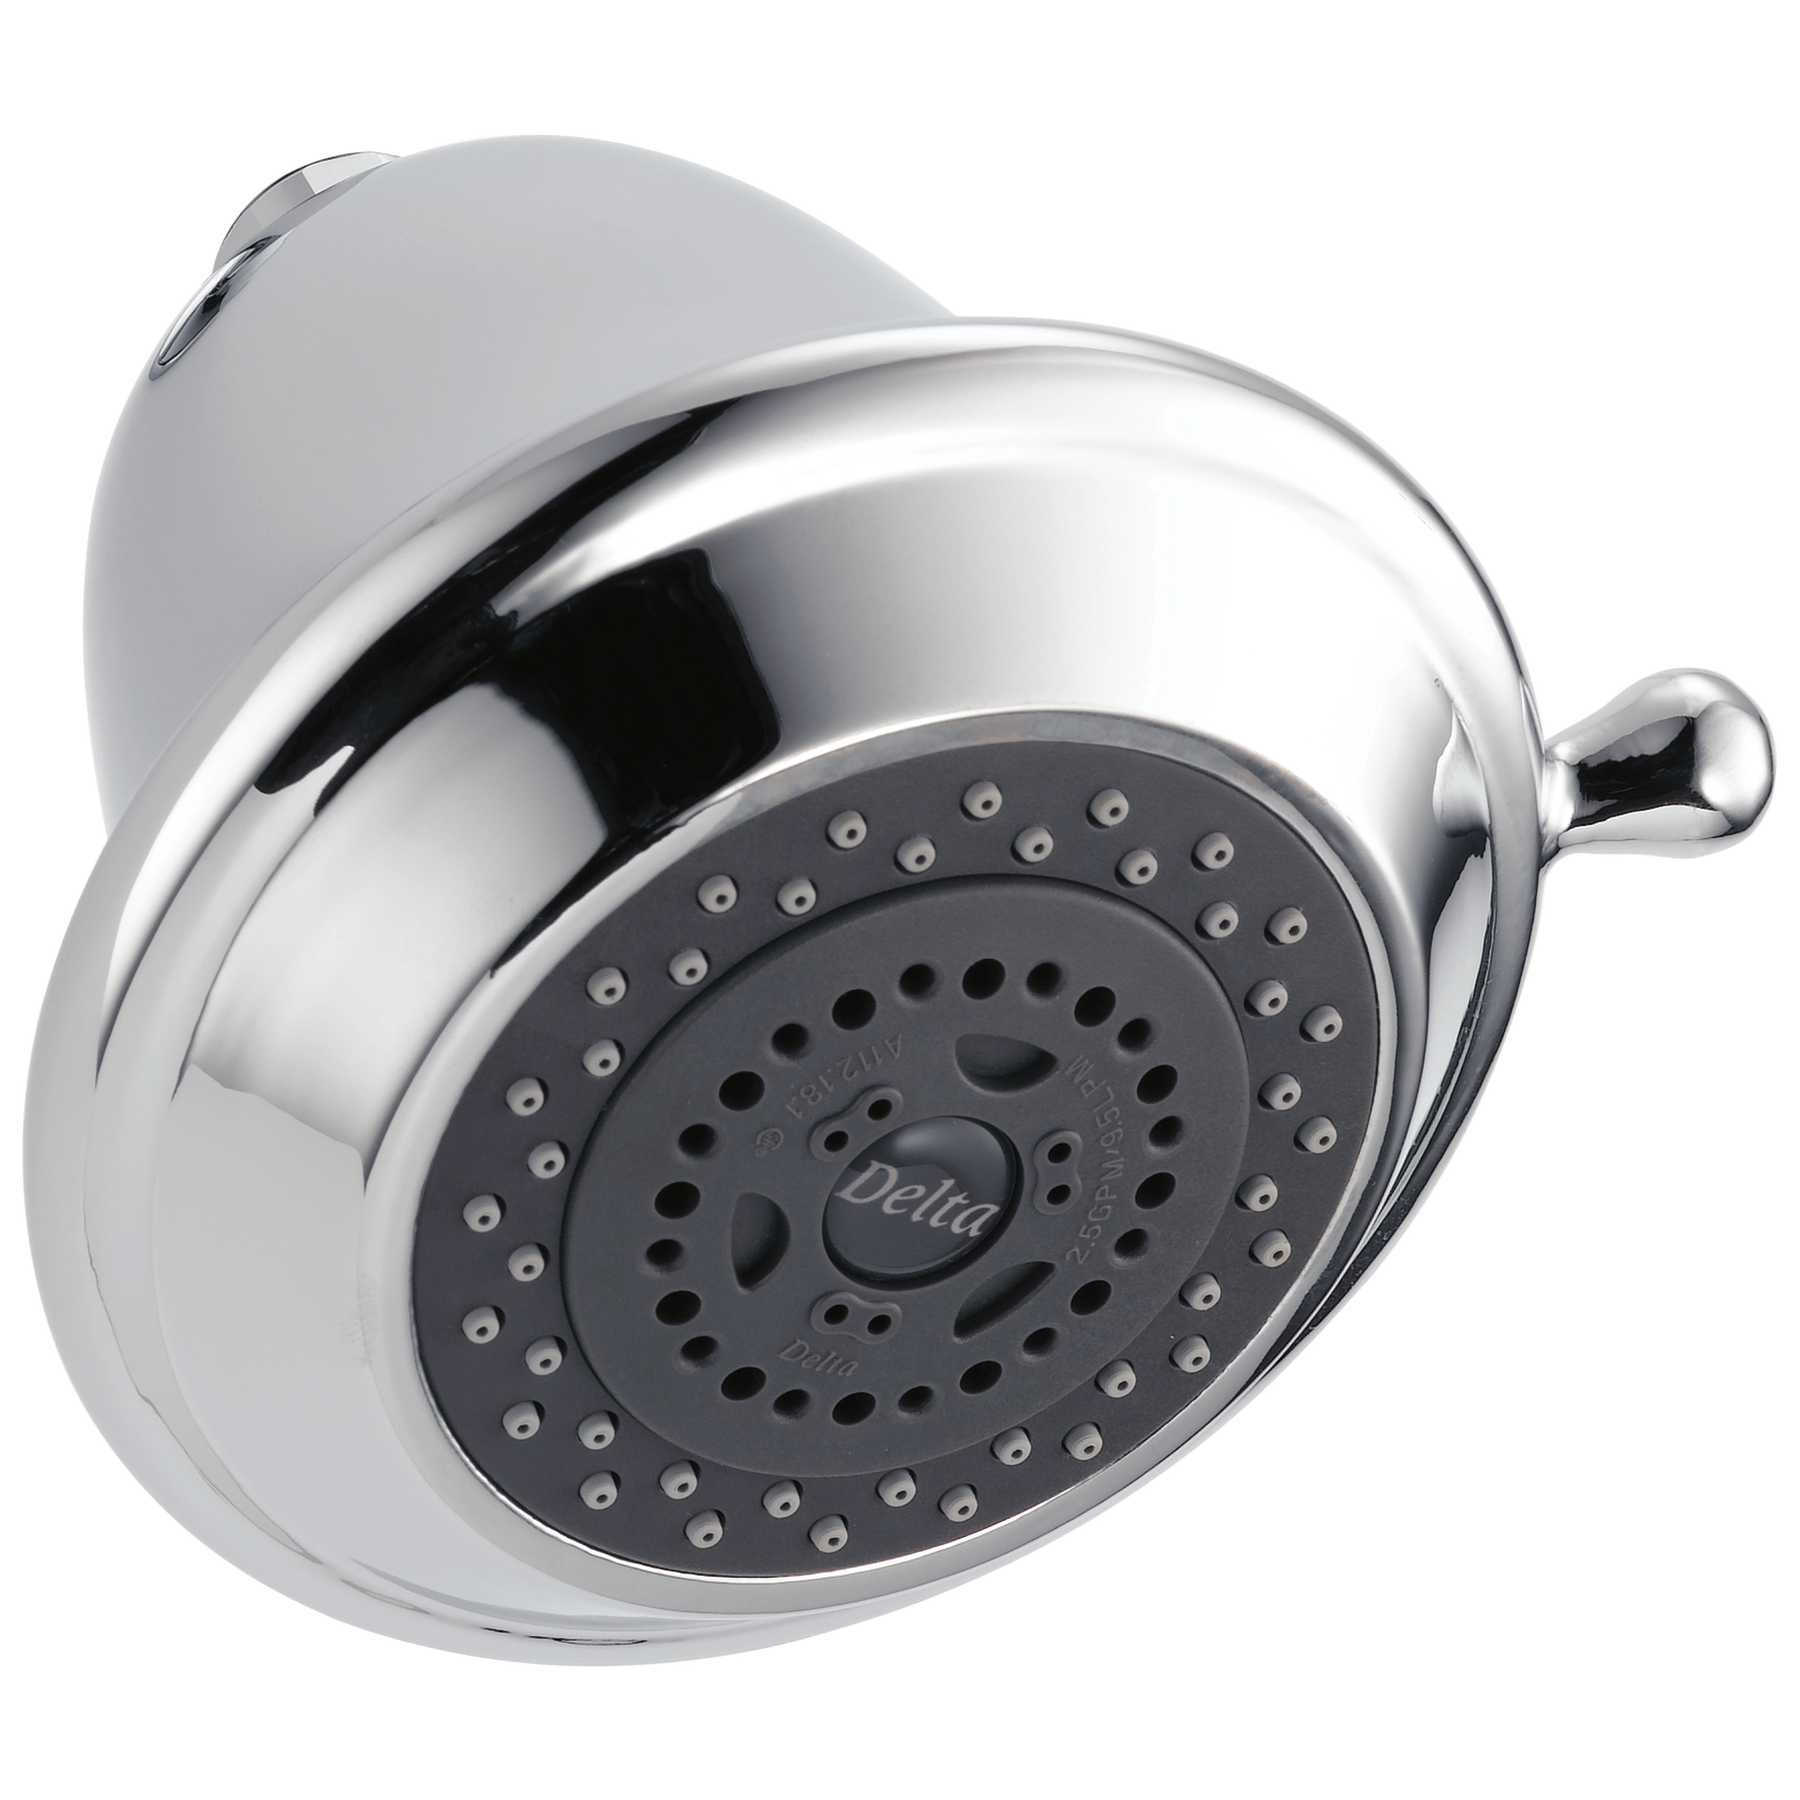 The Ins and Outs of Cleaning a Shower Head with Vinegar - Tru Earth